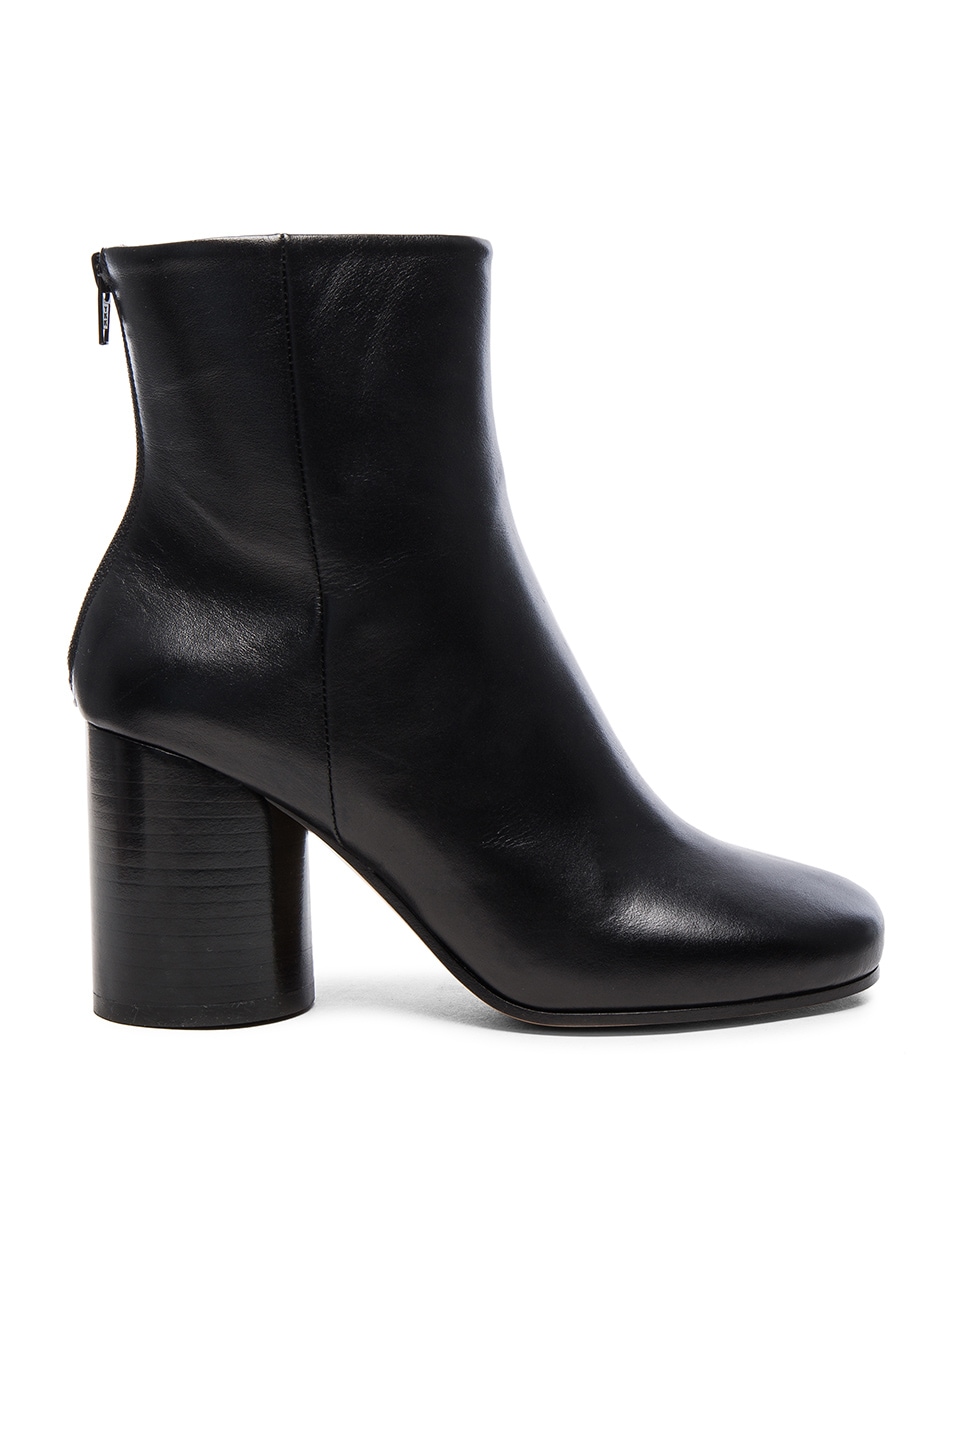 Image 1 of Maison Margiela Leather Booties in Black